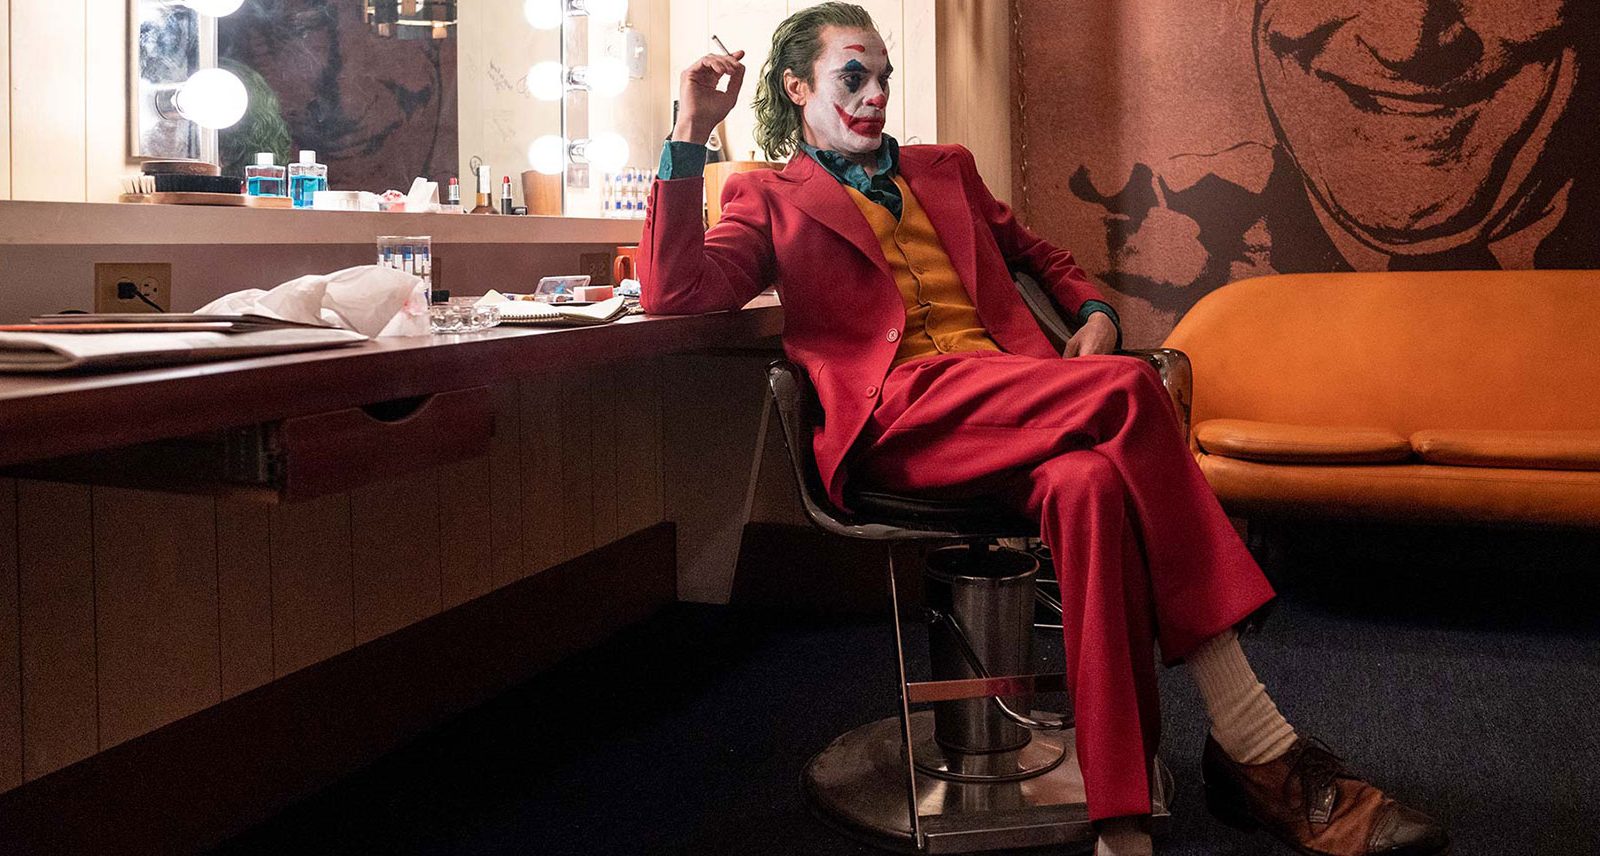 Why So Serious? 8 More Oscar Bait Supervillain Movie Ideas, Inspired by ‘Joker’